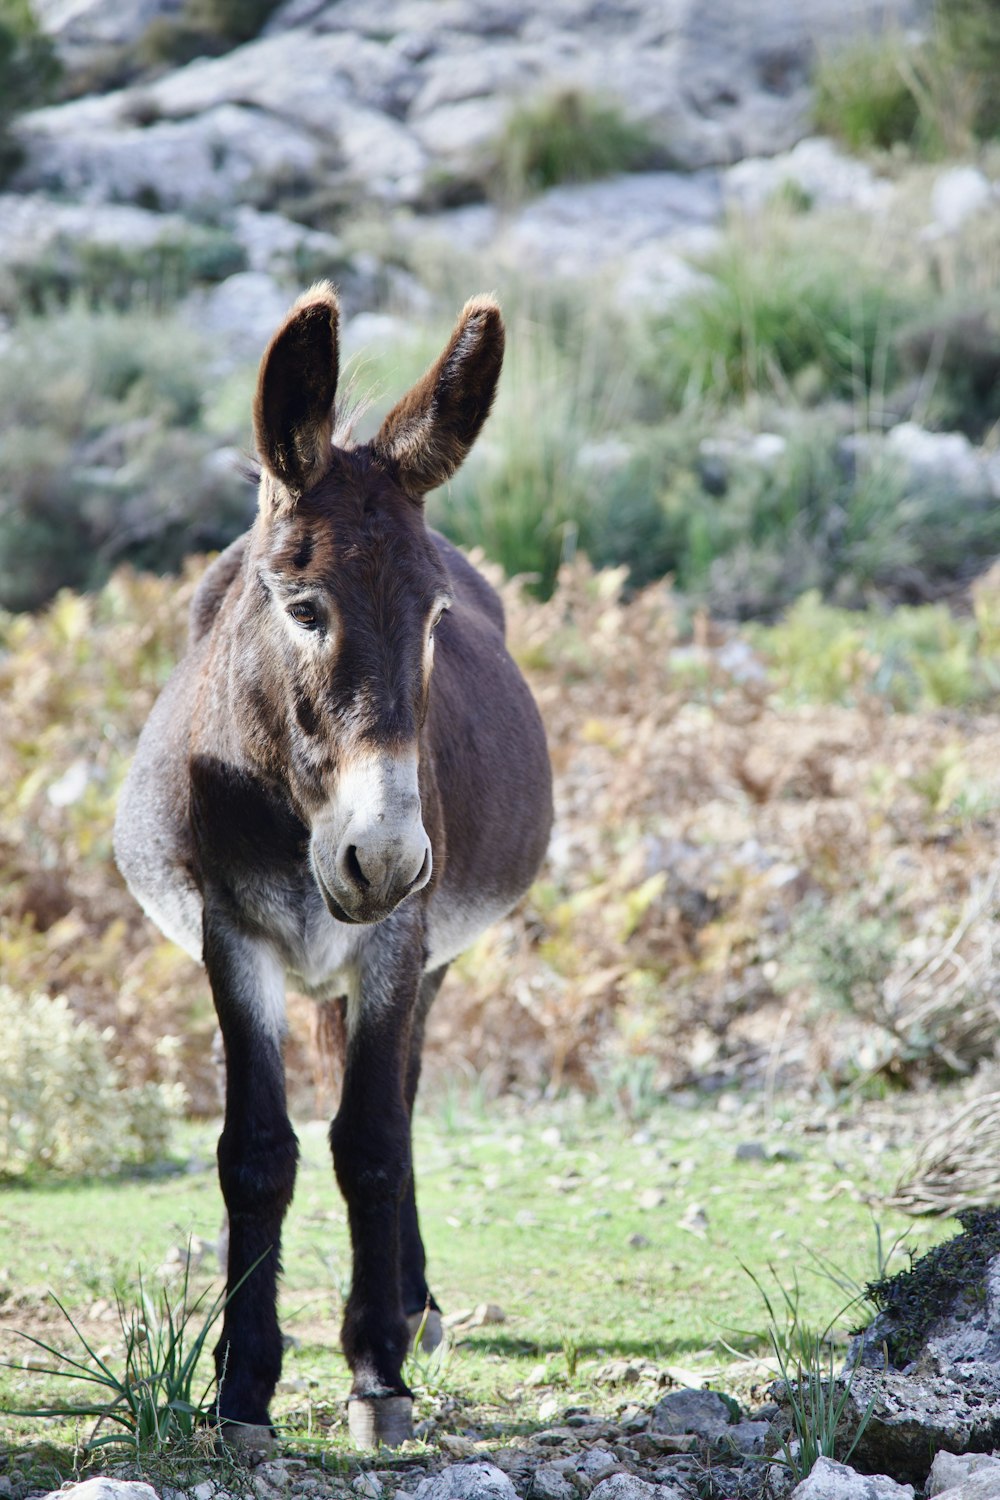 a donkey is standing in a field of grass